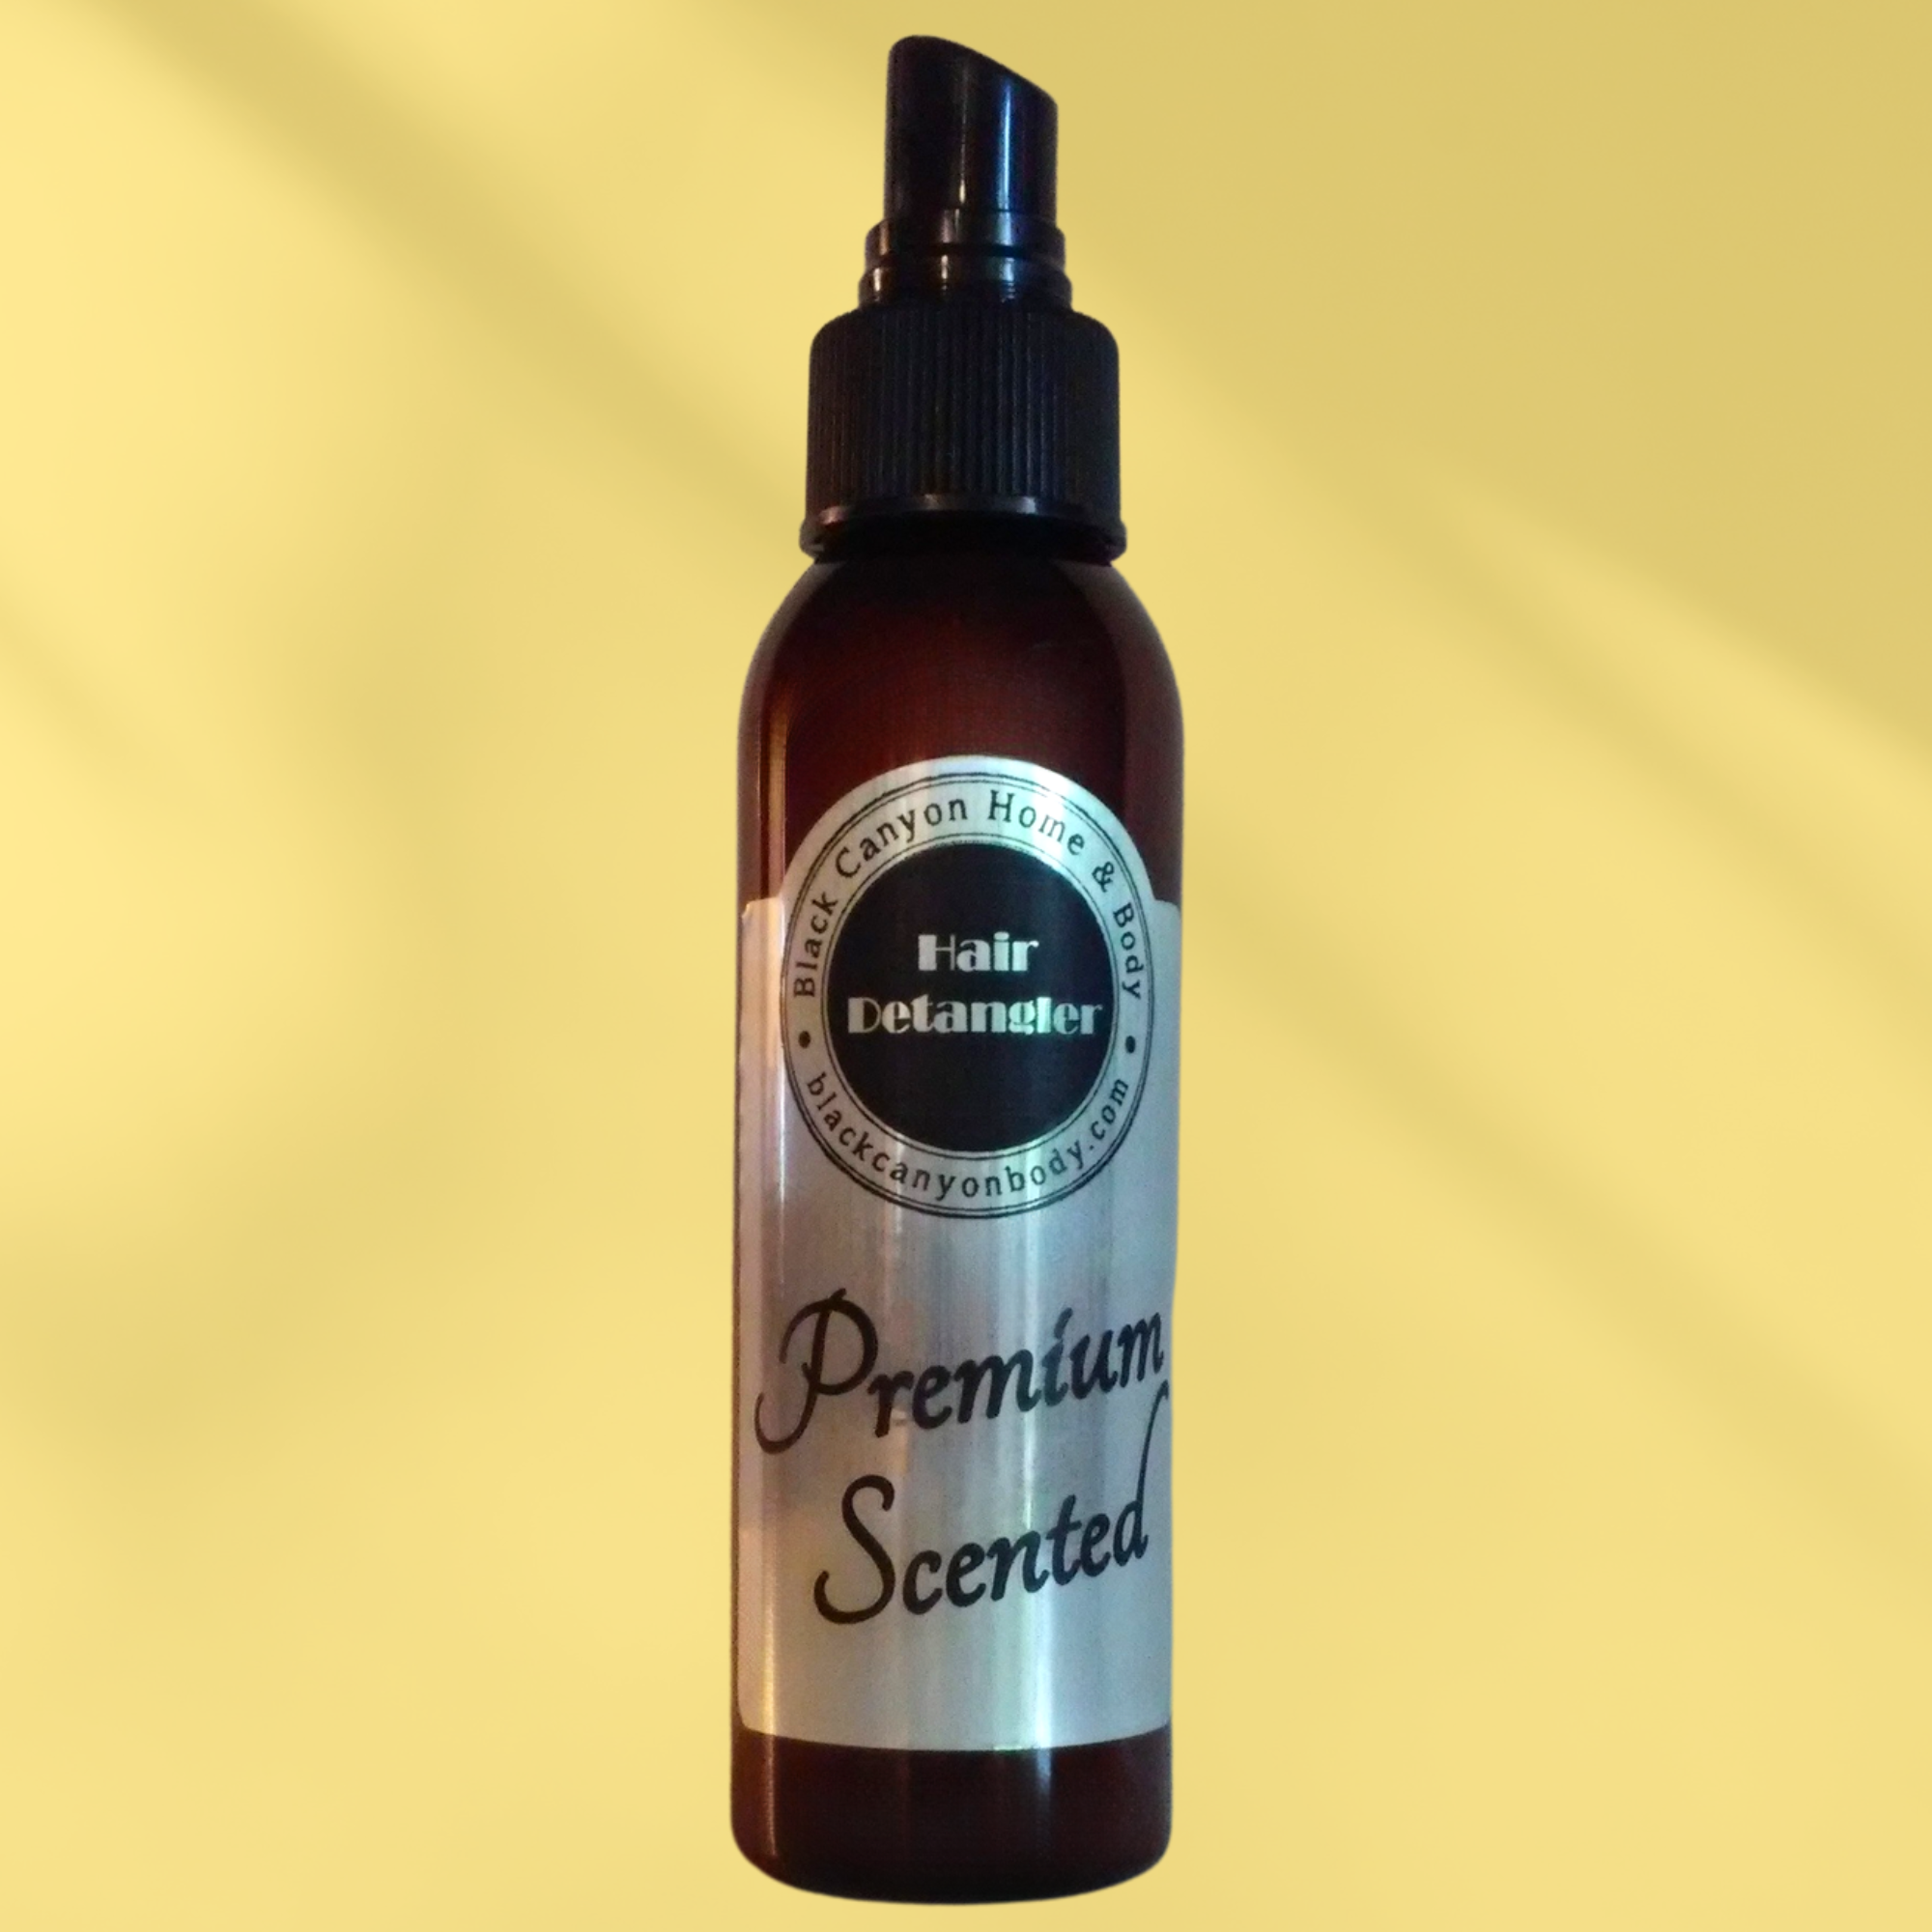 Black Canyon Caramel Woods Scented Hair Detangler Spray with Olive Oil